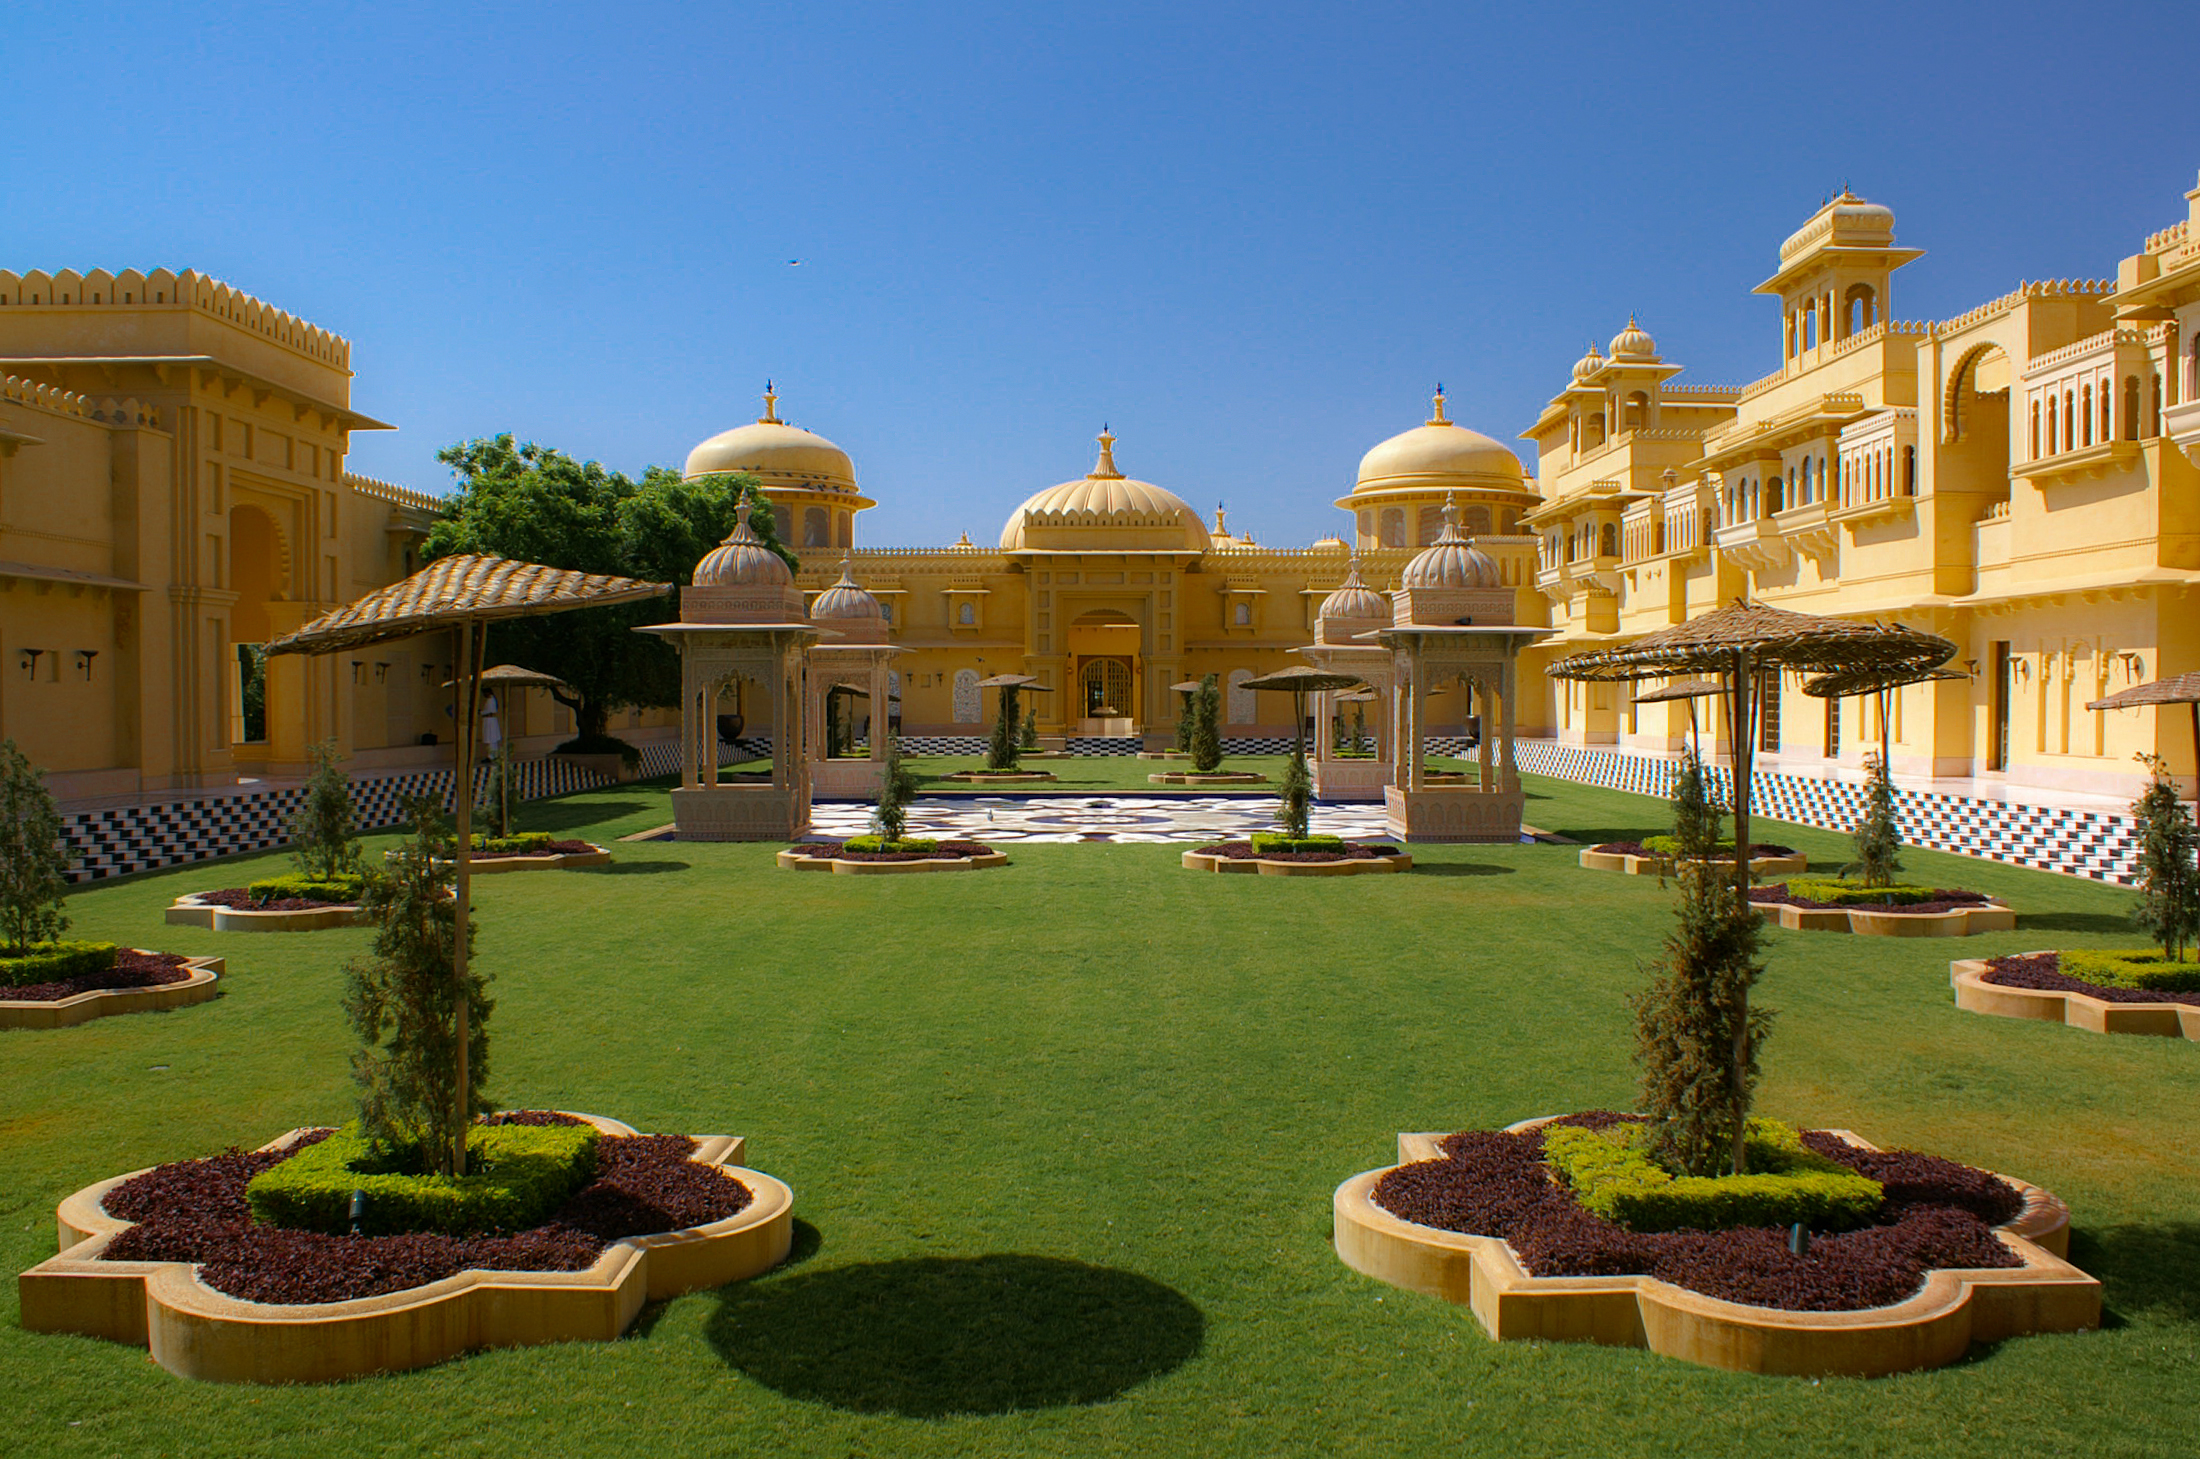 Oberoi Udaivilas' patio on a sunny day near Udaipur, Rajasthan, India